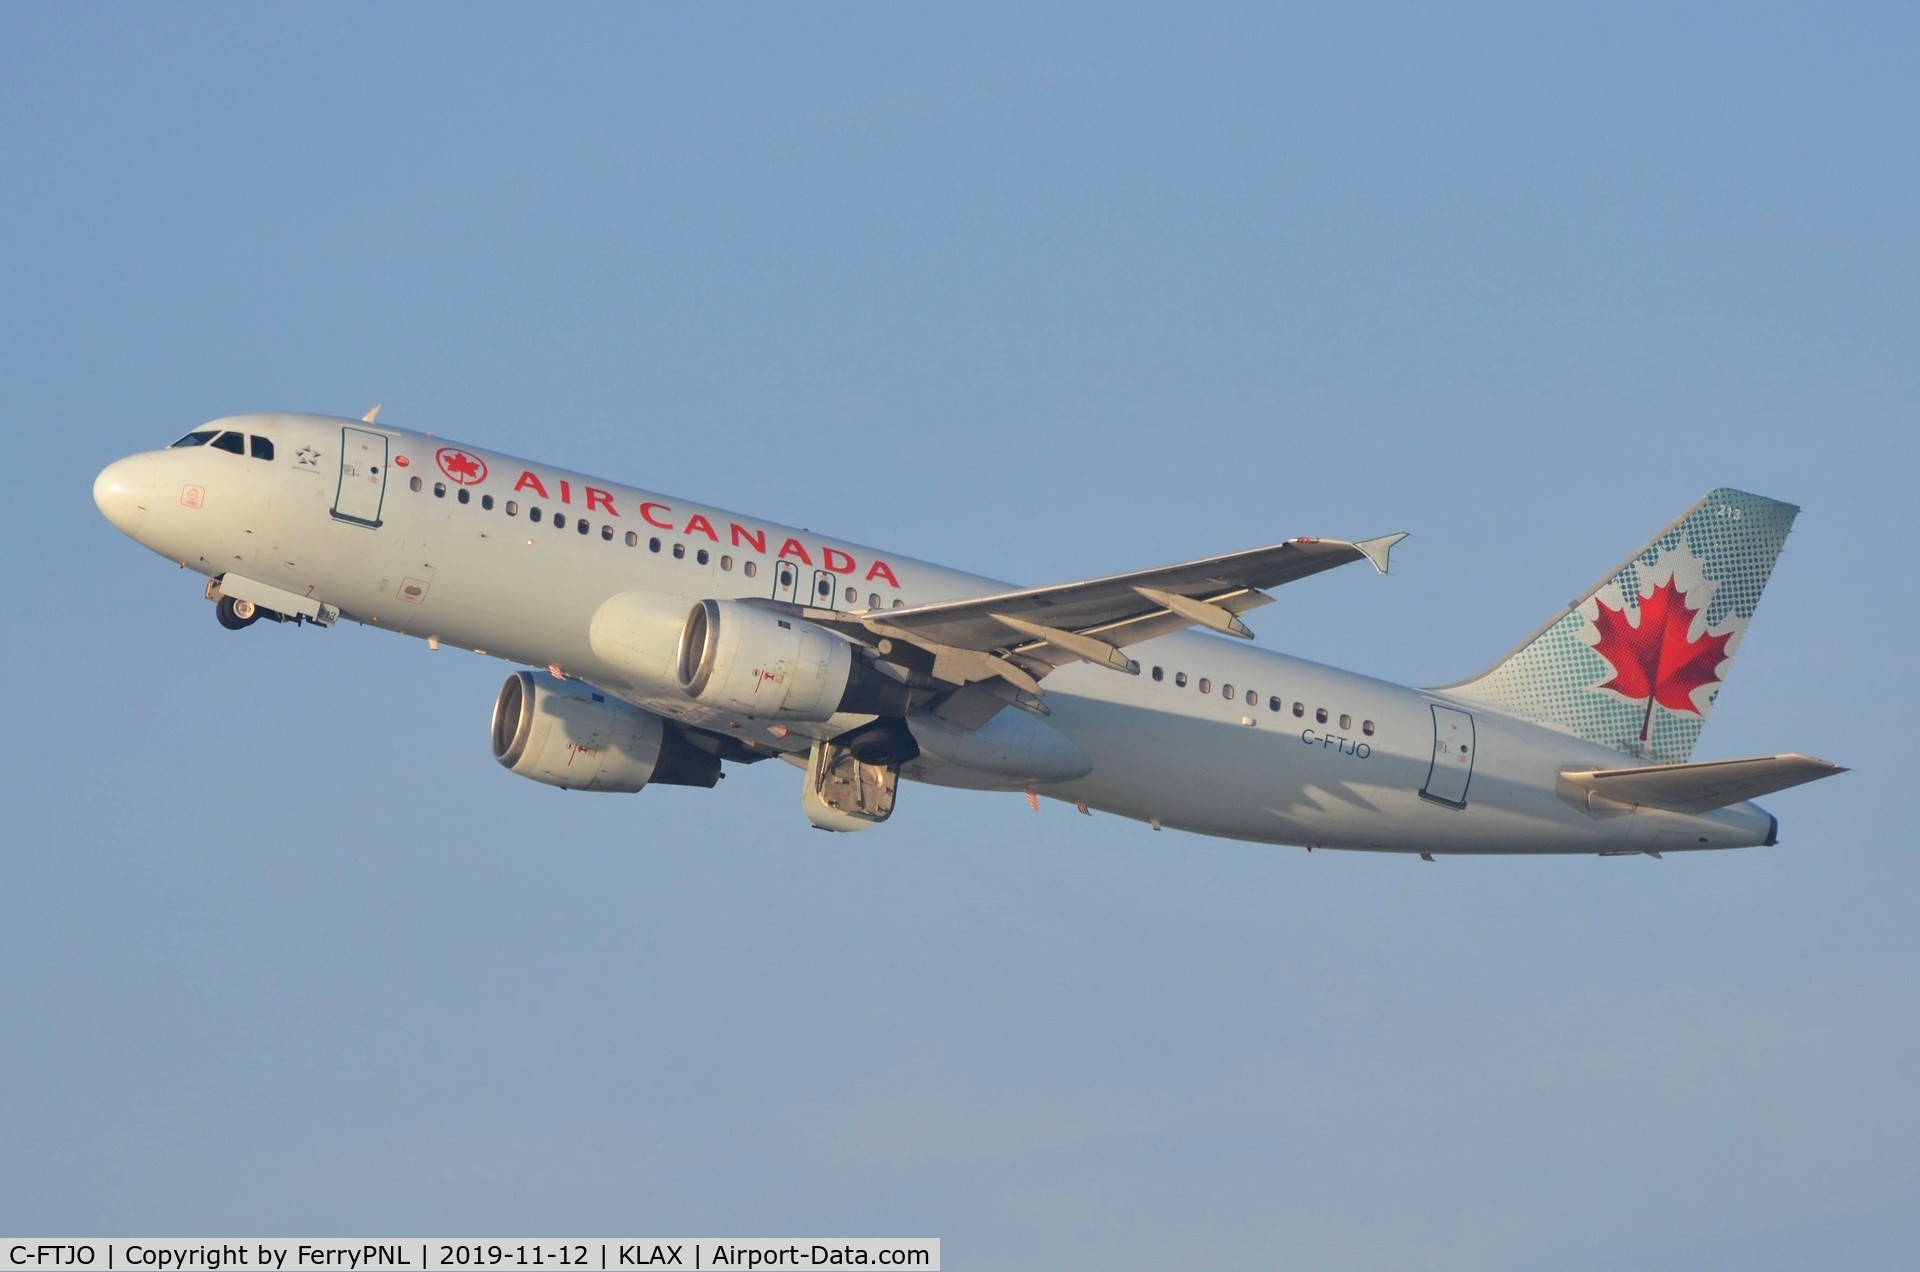 C-FTJO, 1991 Airbus A320-211 C/N 183, Air Canada A320 taking-off just before sunset